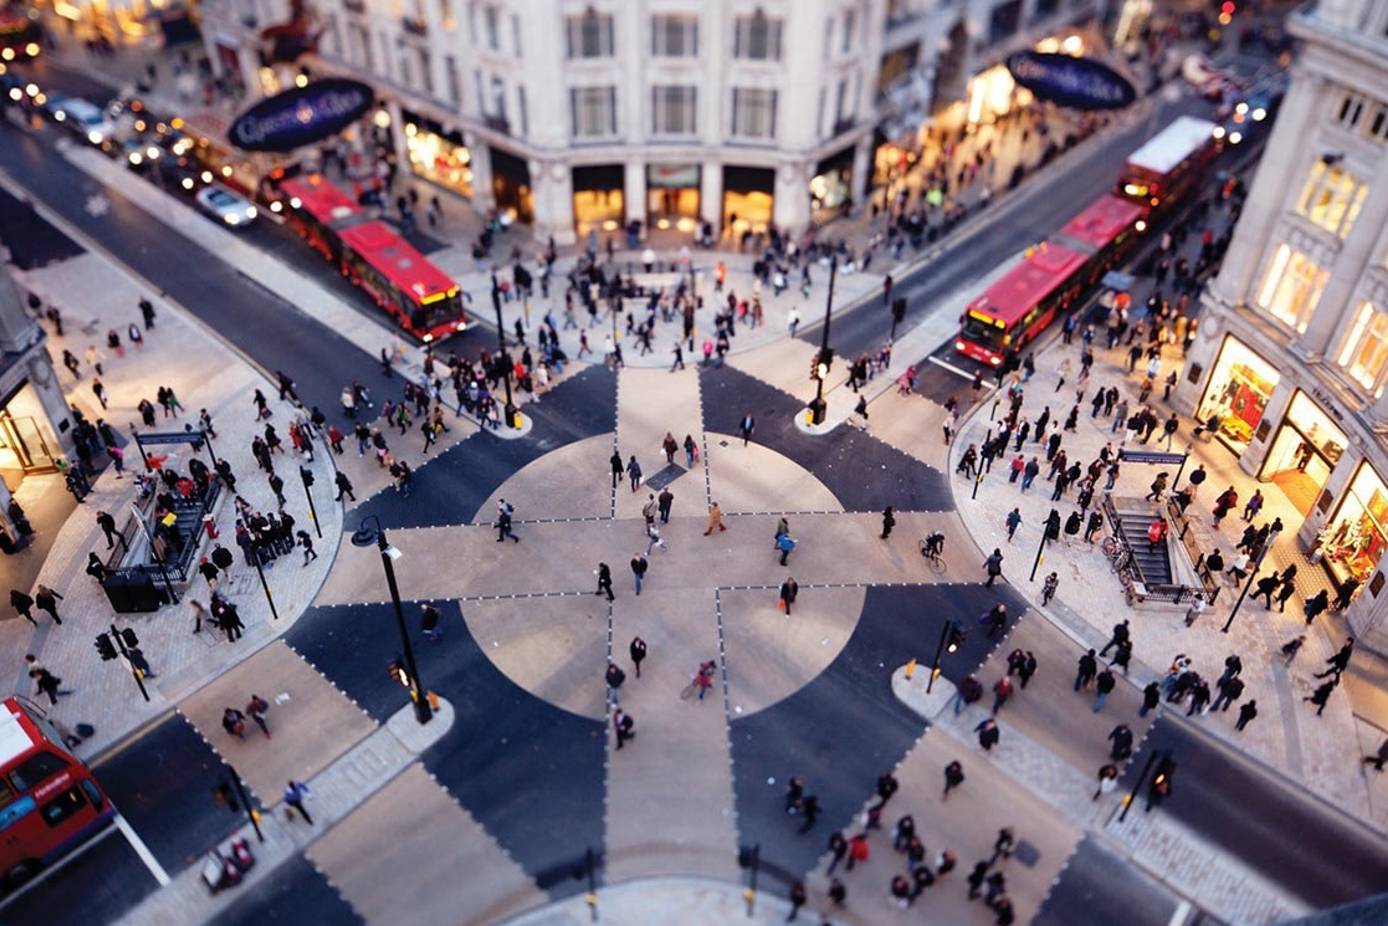 Will the rating revaluation revive Oxford Street?